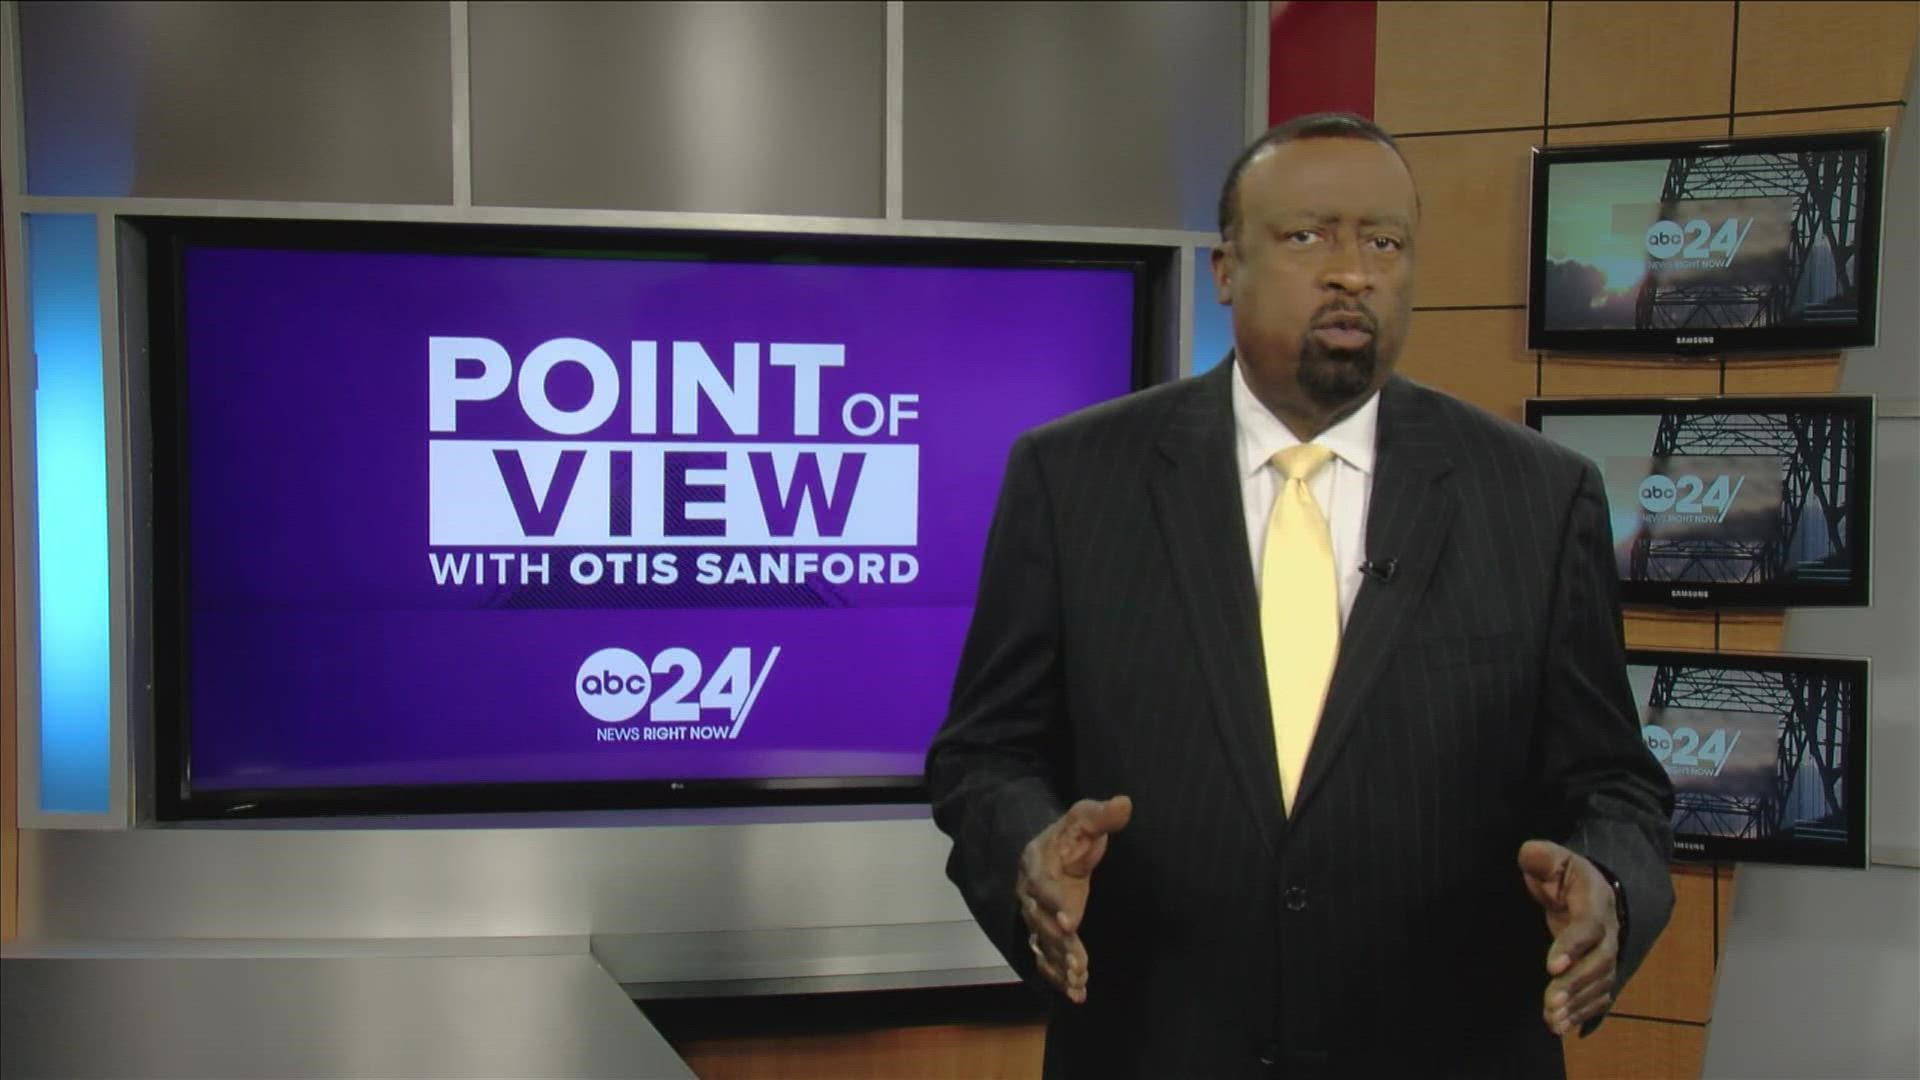 ABC 24 political analyst and commentator Otis Sanford shared his point of view on the sentencing for former TN state Senator Katrina Robinson.